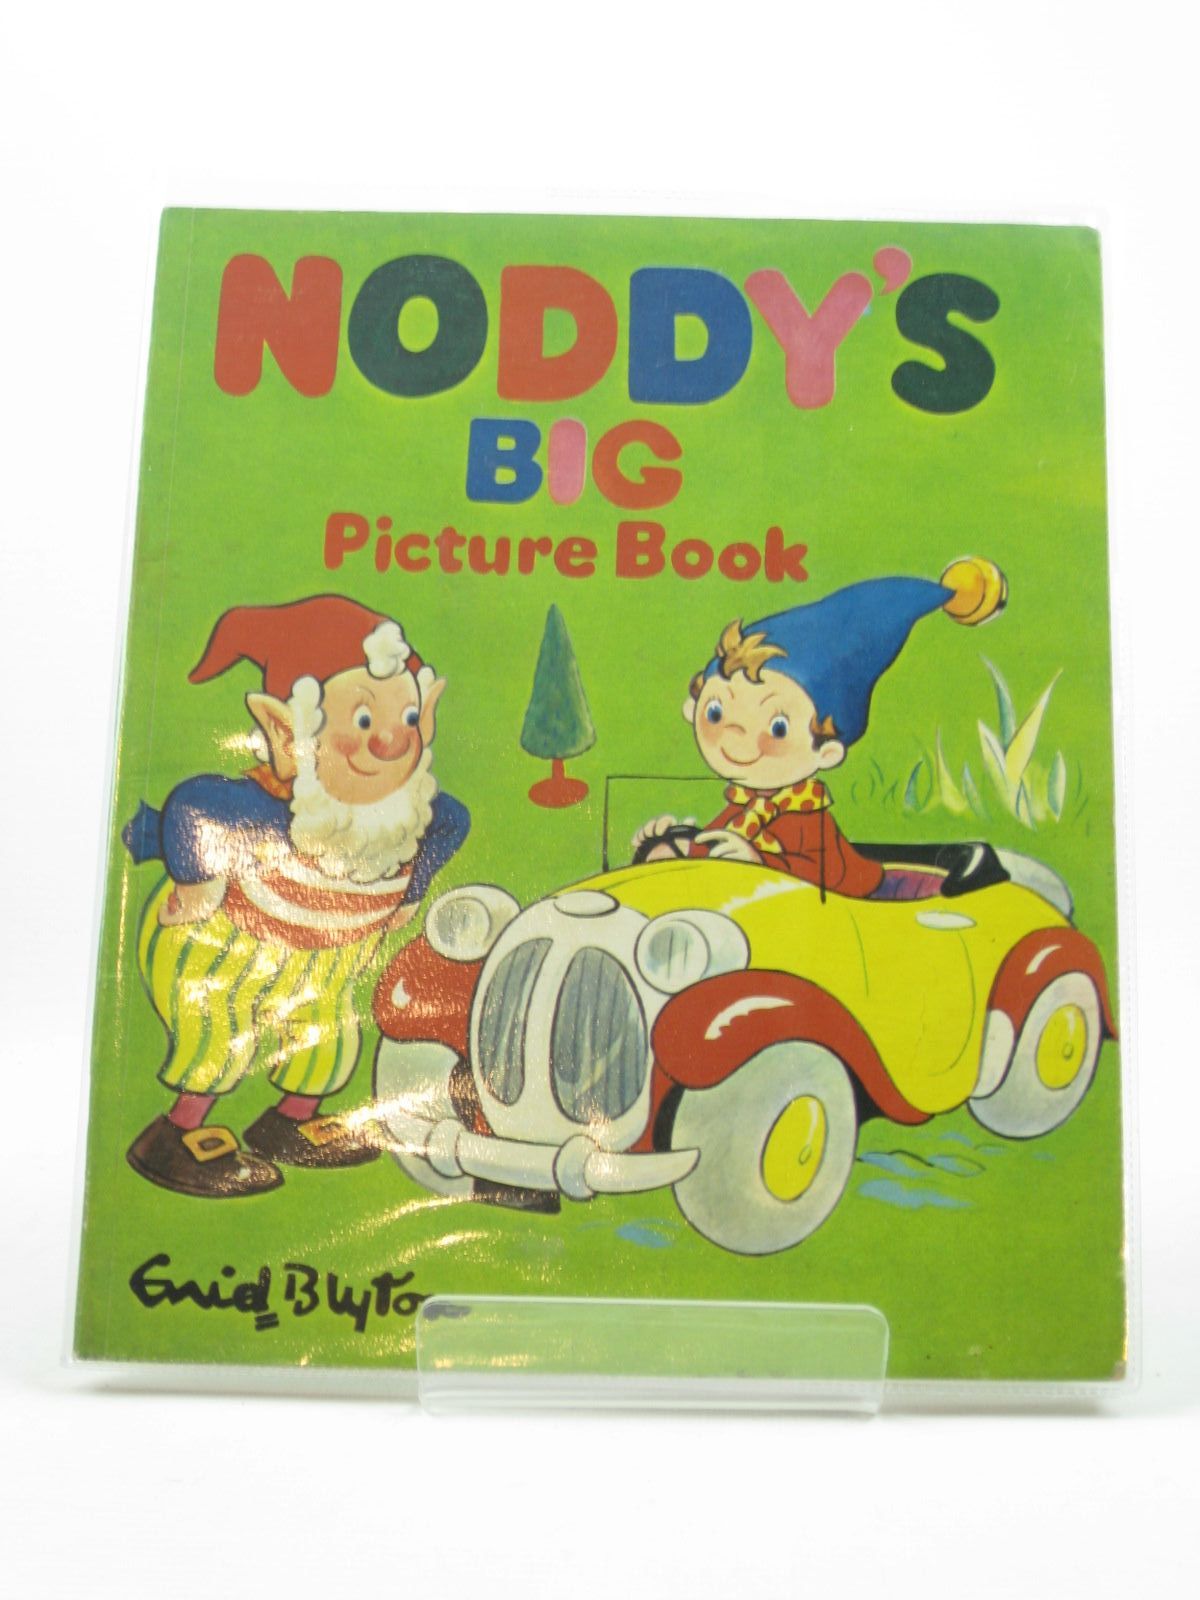 Cover of NODDY'S BIG PICTURE BOOK by Enid Blyton